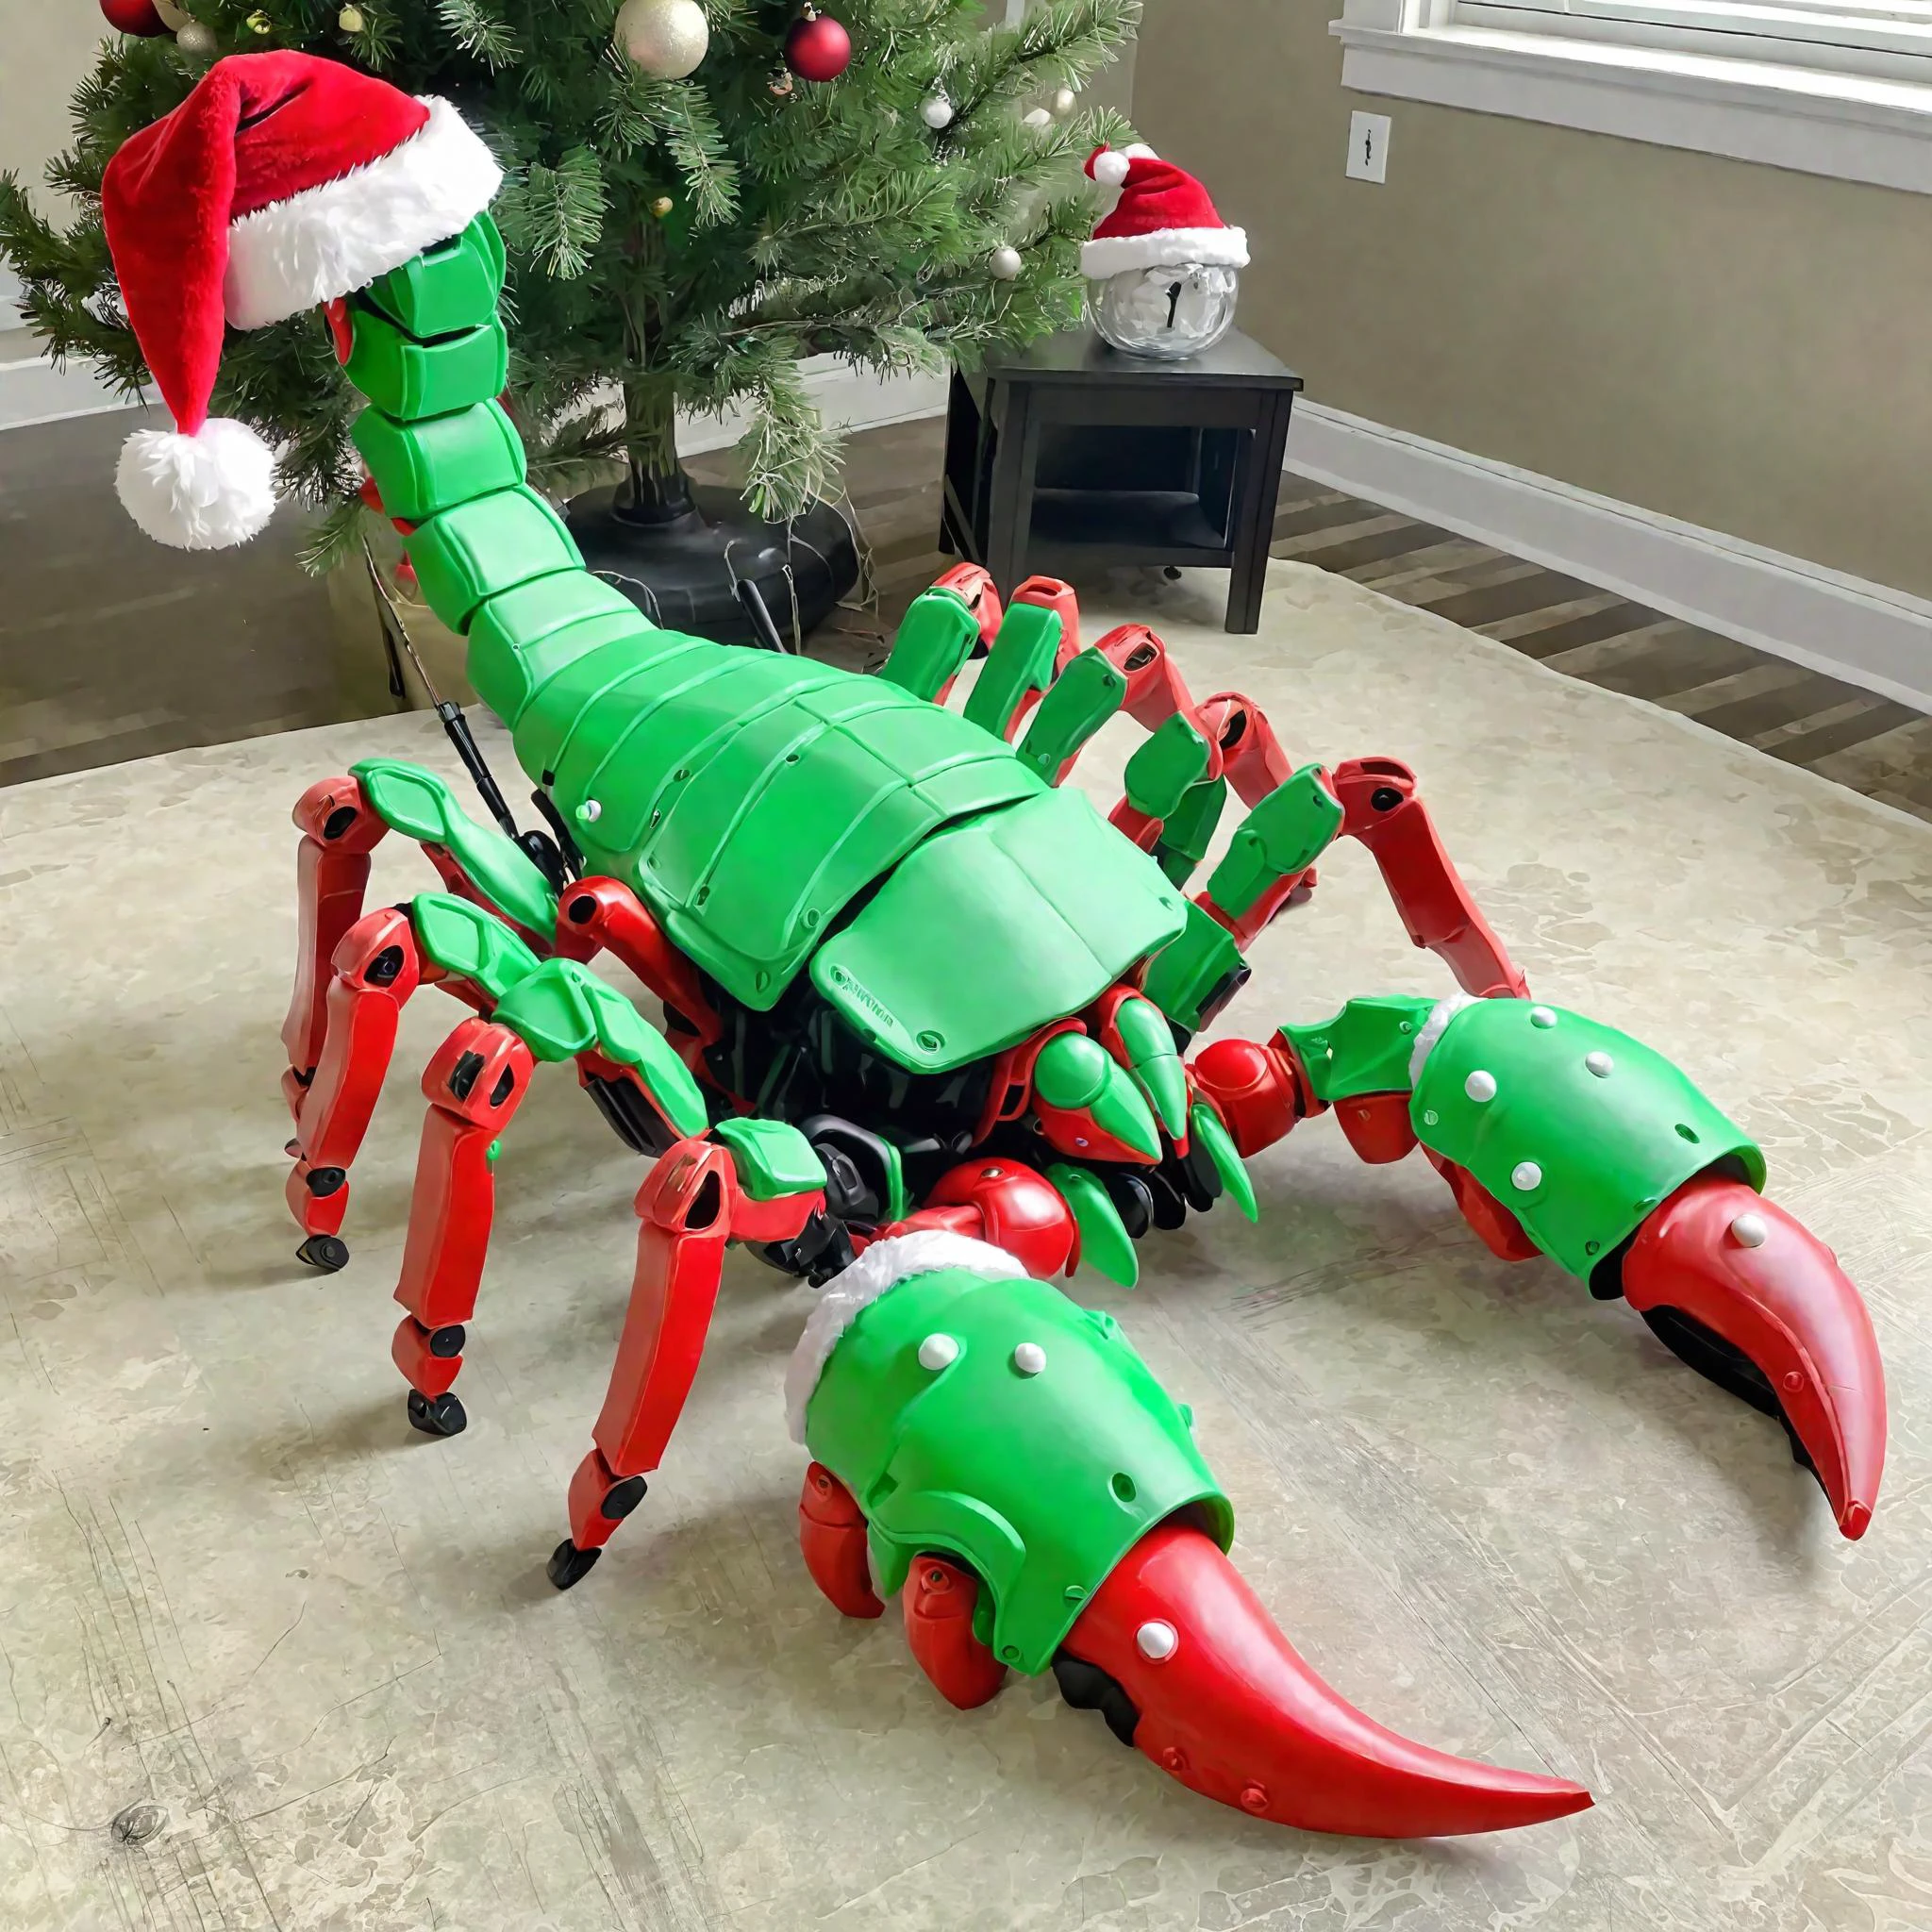 massive EdobScorpion battle mech ai overlord in greenteam colors and a santa hat 